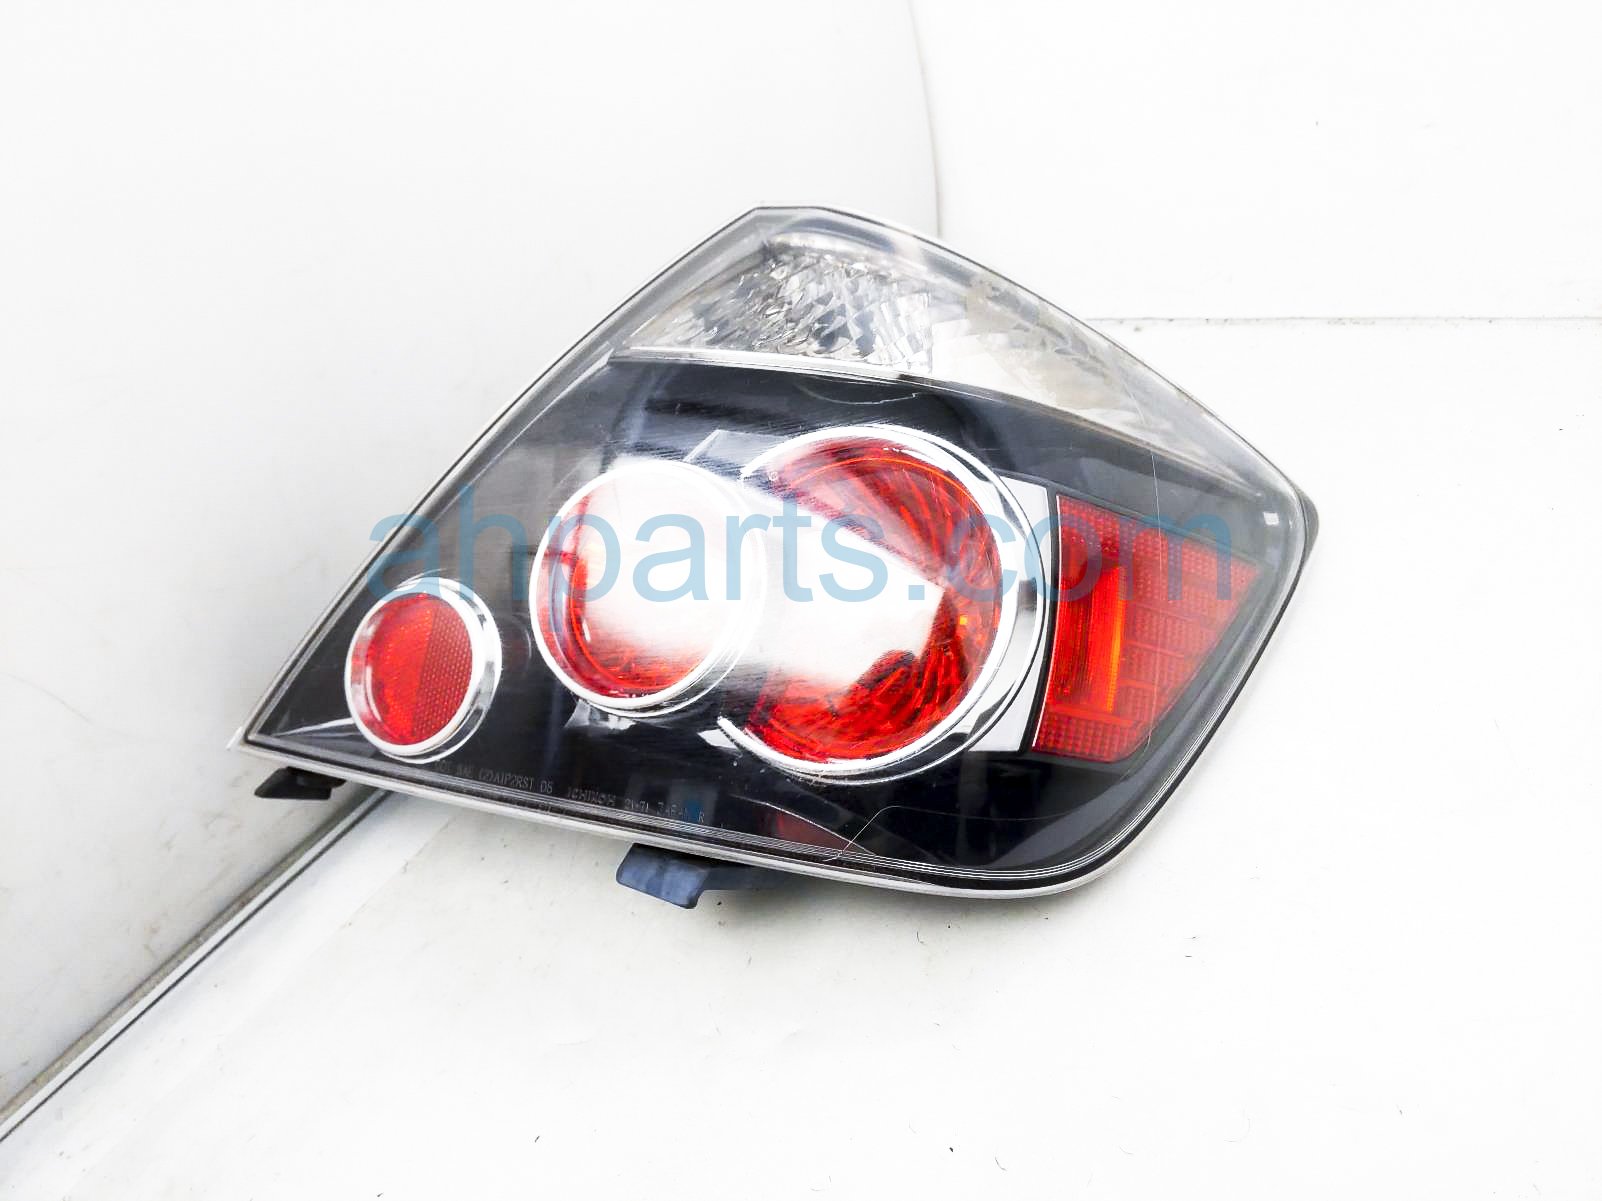 $50 Scion RH TAIL LAMP (ON BODY) - NOTES